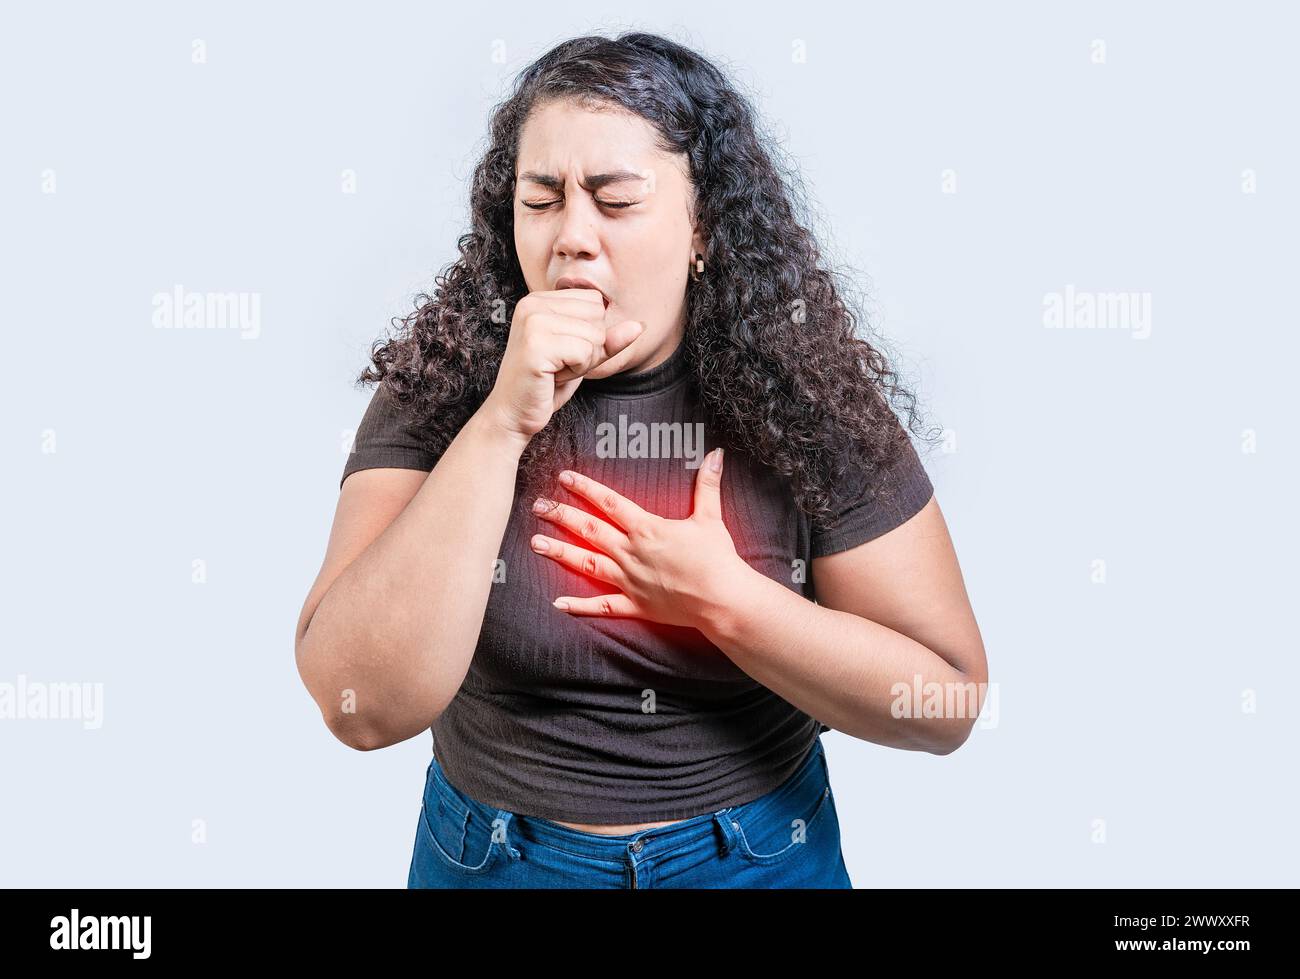 Girl with bronchitis coughing hard isolated. Young woman suffering from cough isolated Stock Photo